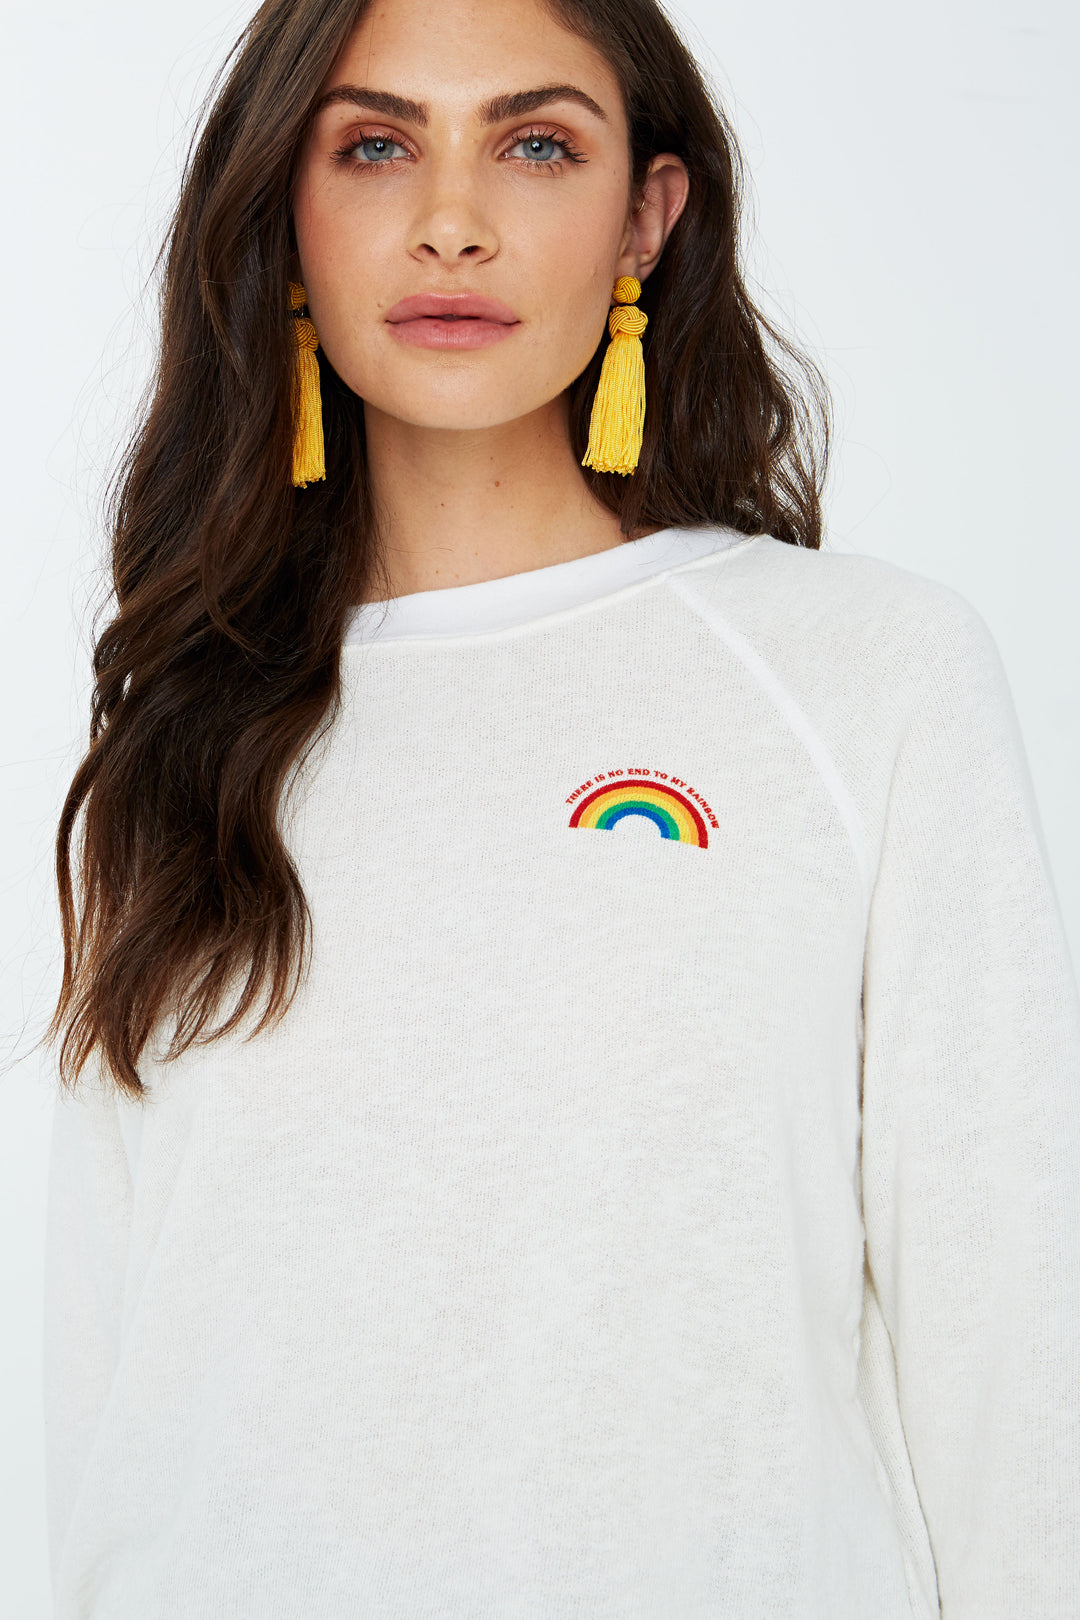 No End To My Rainbow Sweatshirt - Kingfisher Road - Online Boutique